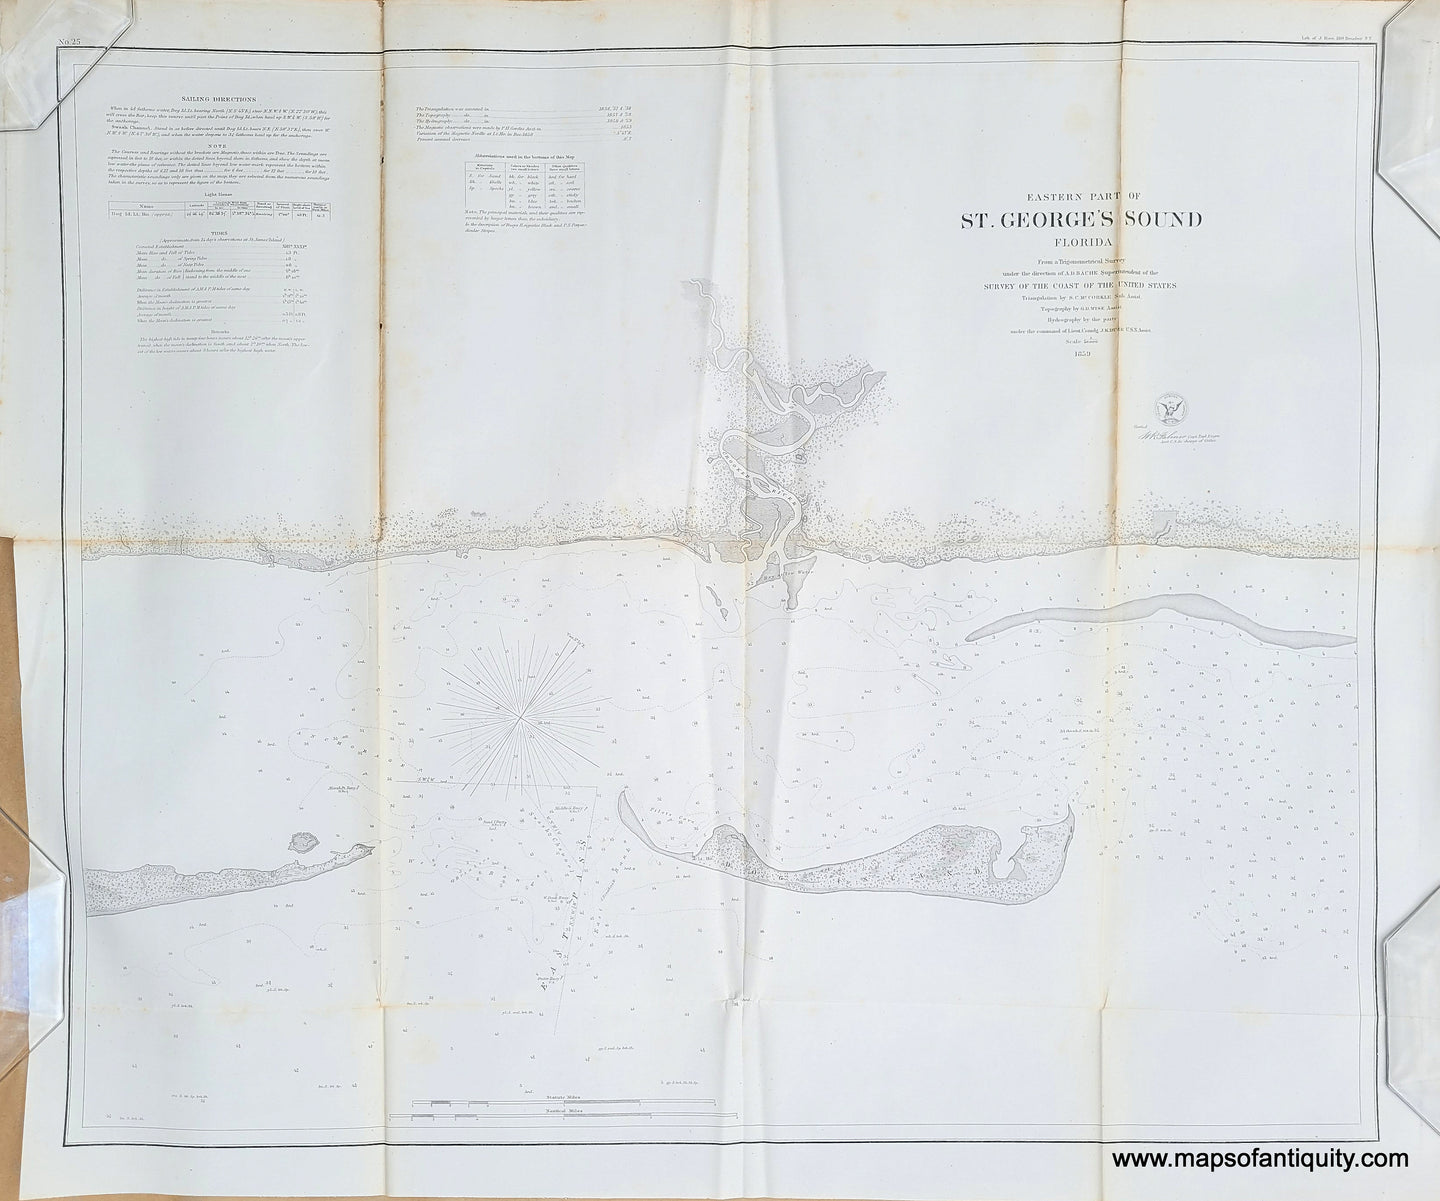 Antique-Map-Eastern-Part-of-St.-George's-George-Sound-Florida-1859-1850s-1800s-USCS-Coast-Coastal-Chart-Survey-Maps-of-Antiquity